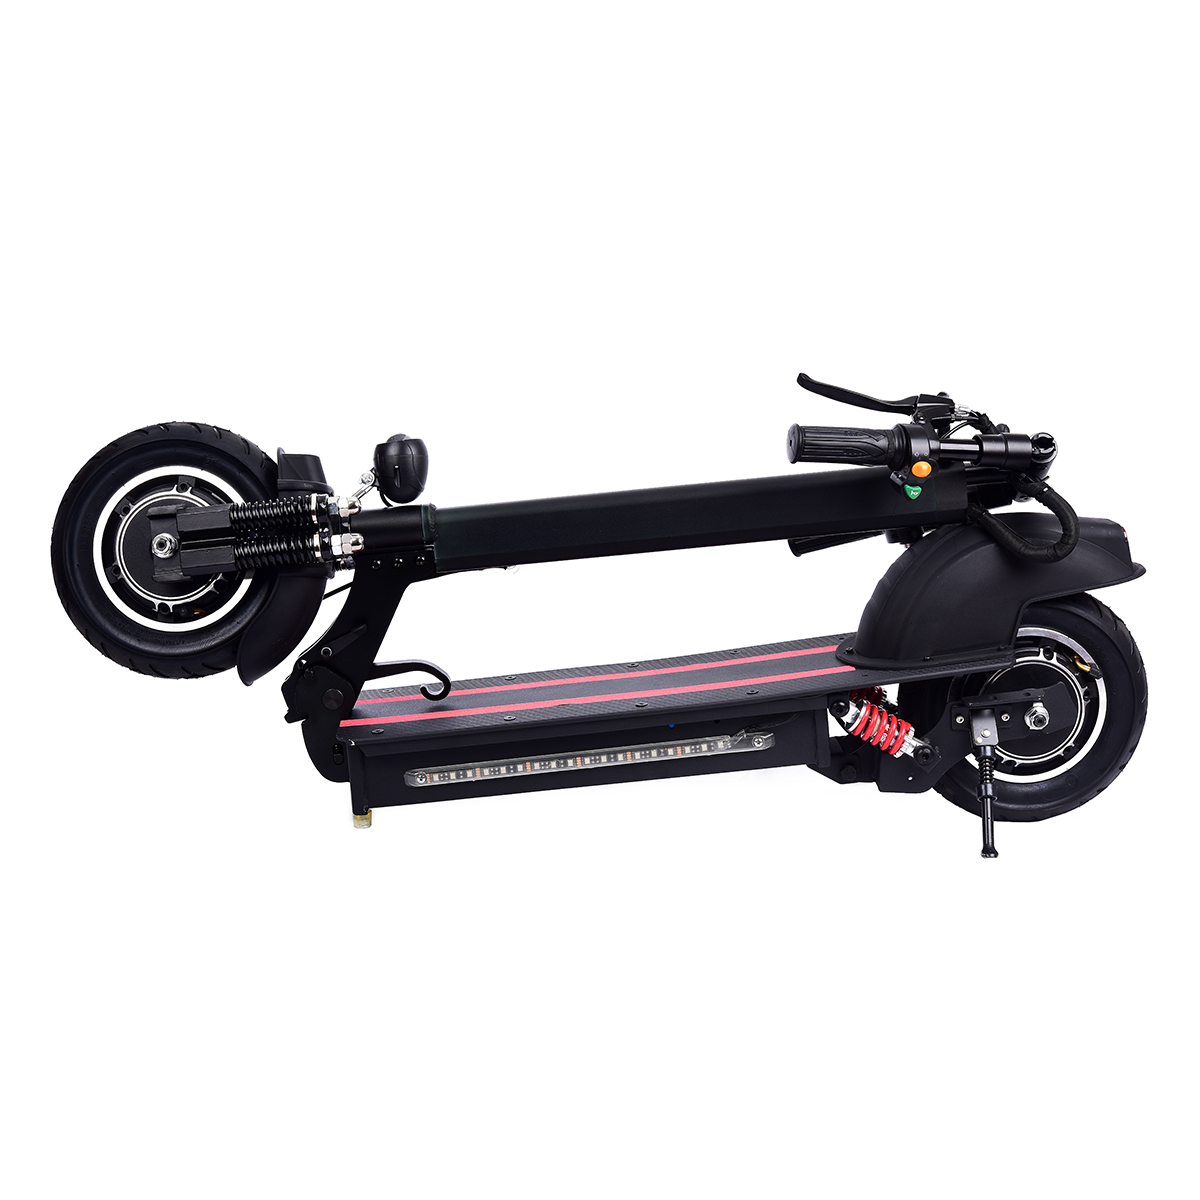 Find [EU DIRECT] Lamtwheel 48V 22Ah 600W*2 Dual Motor 10 inch Tire Electric Scooter 45km Mileage Range 120kg Max Load E-Scooter for Sale on Gipsybee.com with cryptocurrencies